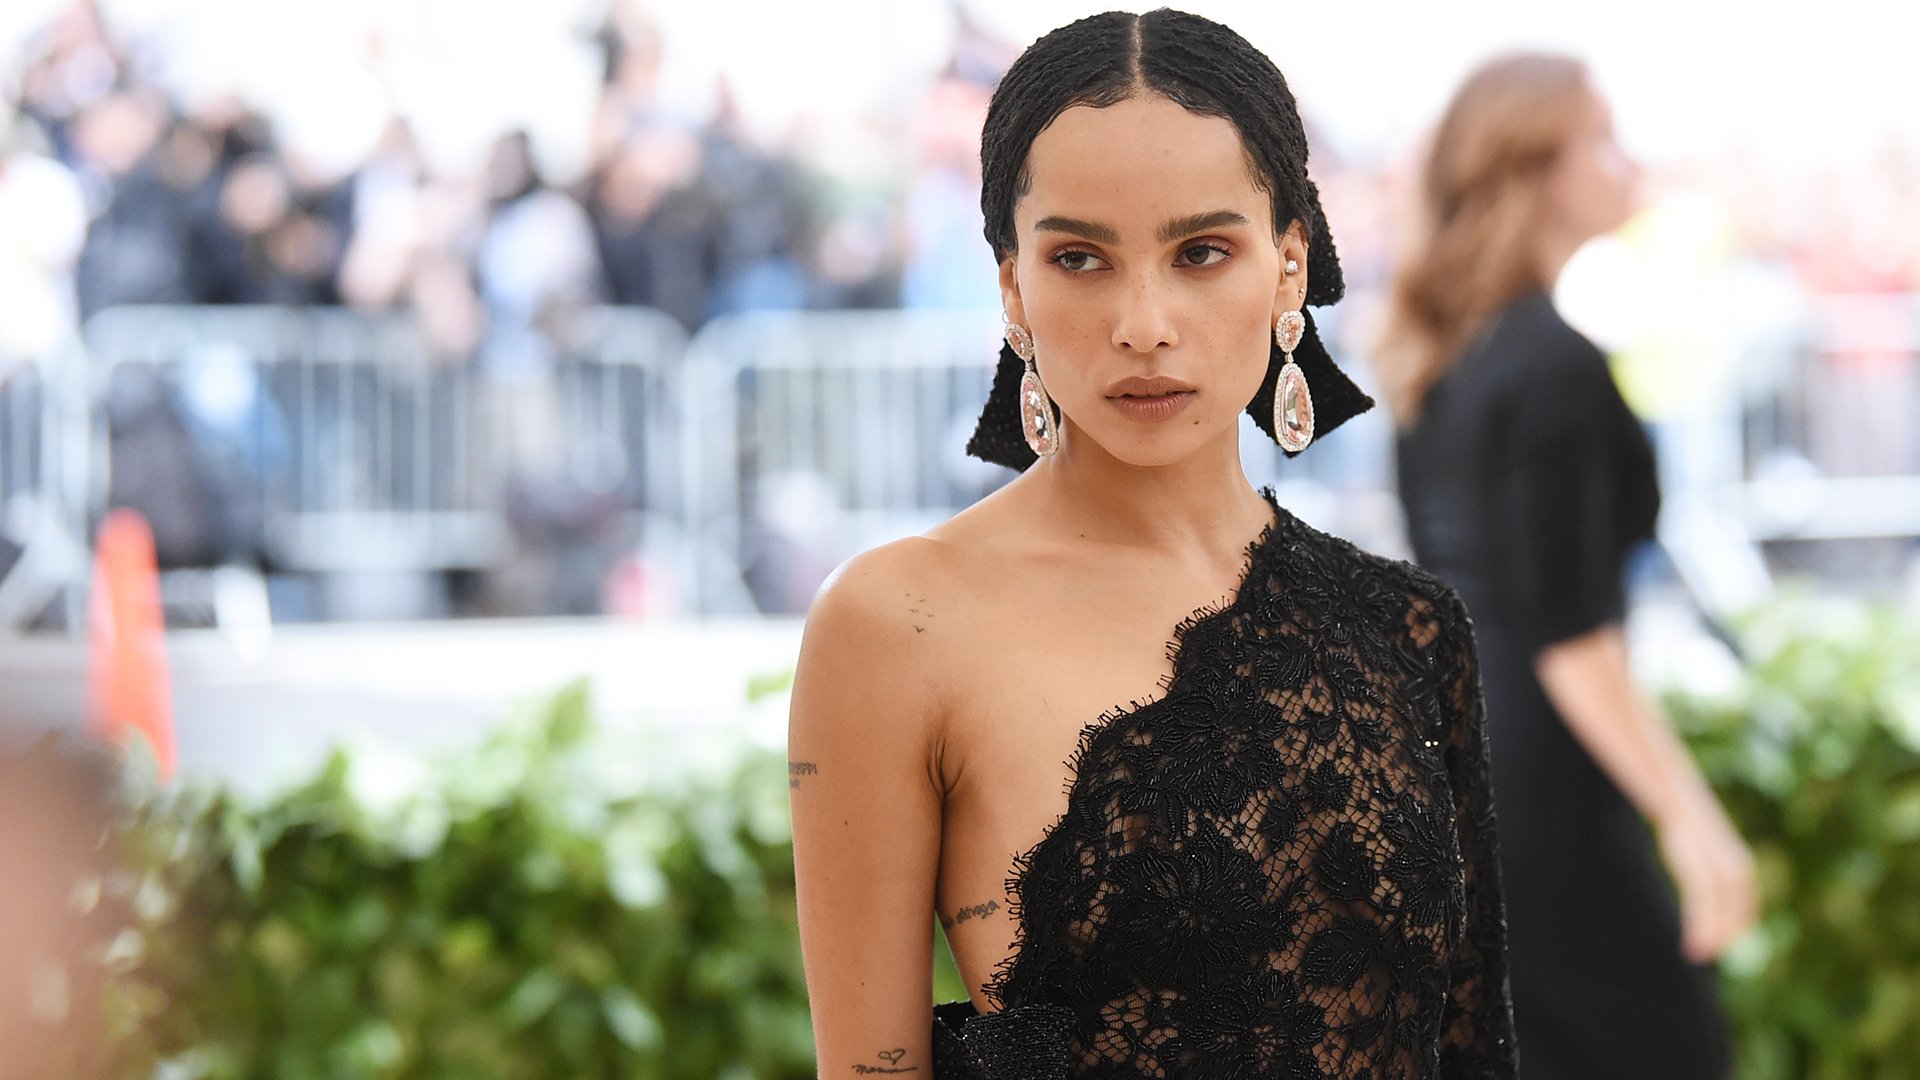 Zoë Kravitz's Catwoman Casting In 'The Batman' Is Iconic